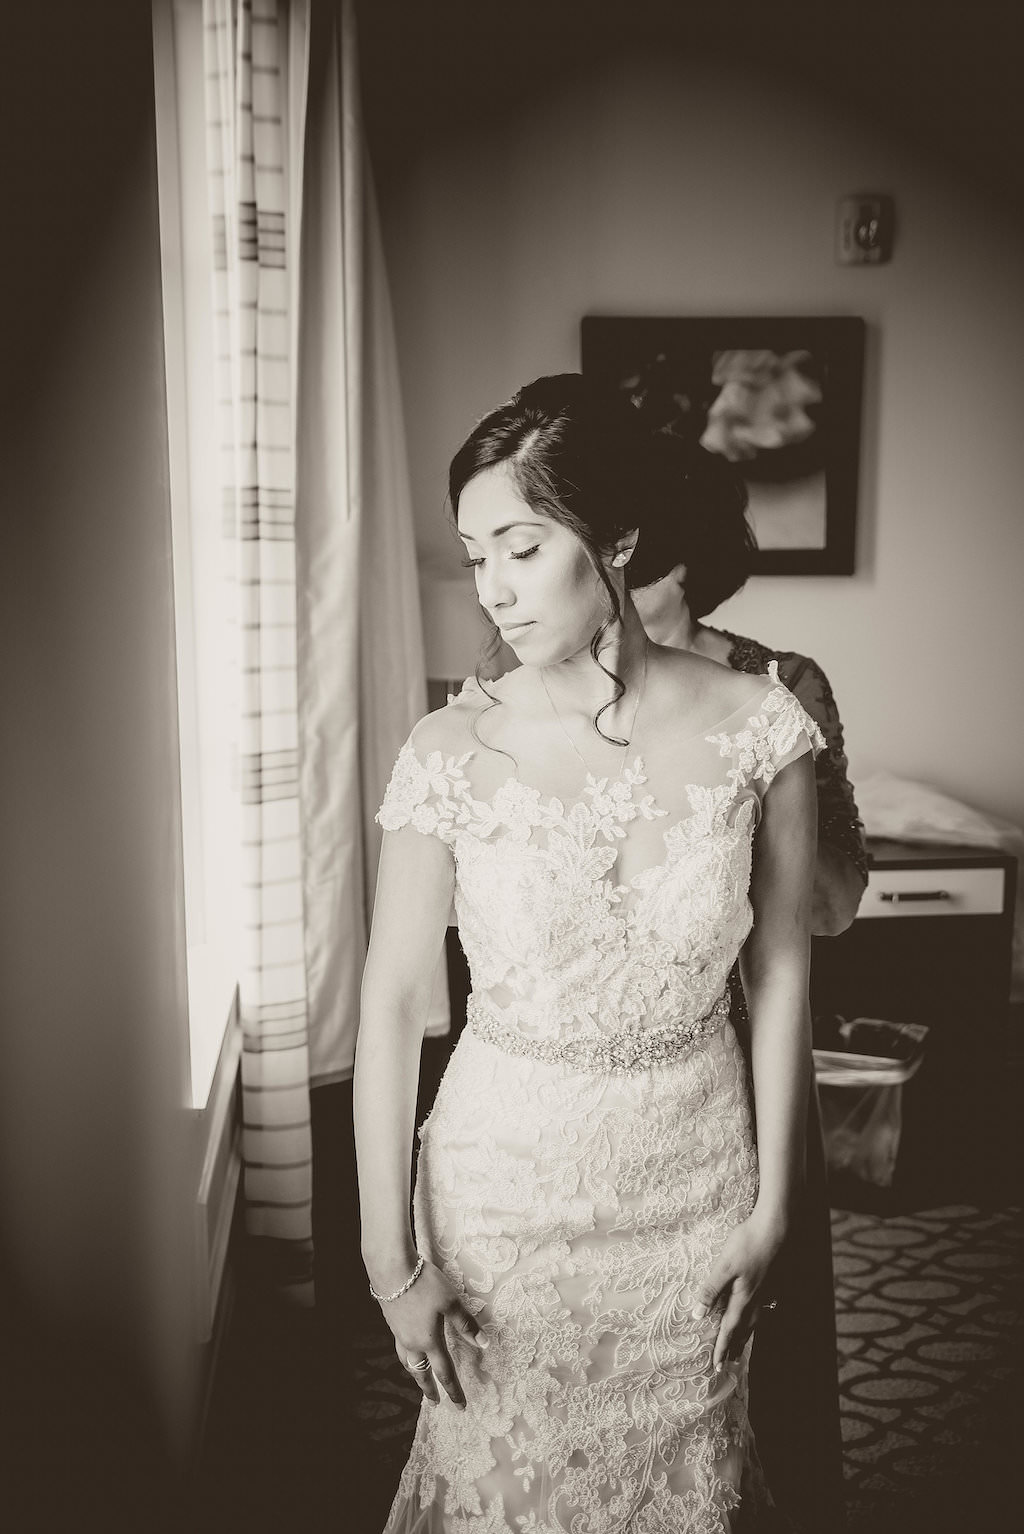 Florida Bride Getting Ready Portrait in Fitted Allure Lace and Illusion Cap Sleeve Wedding Dress with Rhinestone Belt | Tampa Bay Wedding Photographer Kristen Marie Photography